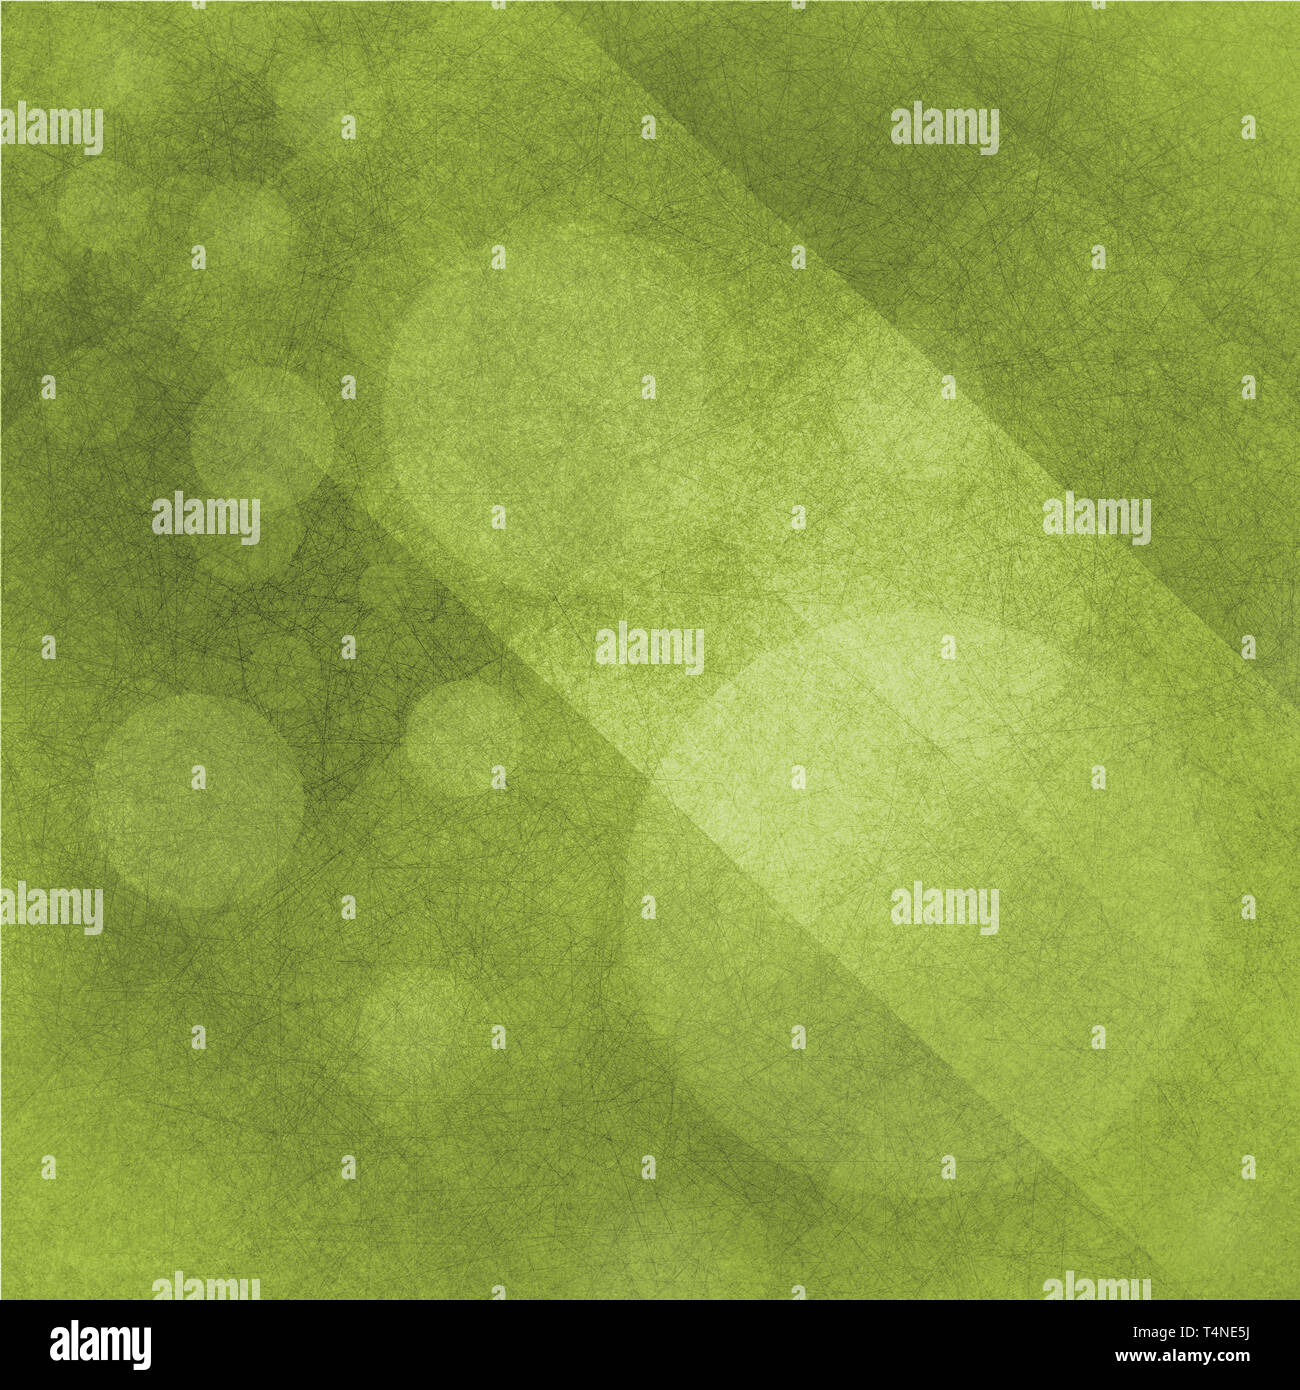 abstract green background, fun bubbles and diagonal stripe abstract pattern design with texture Stock Photo